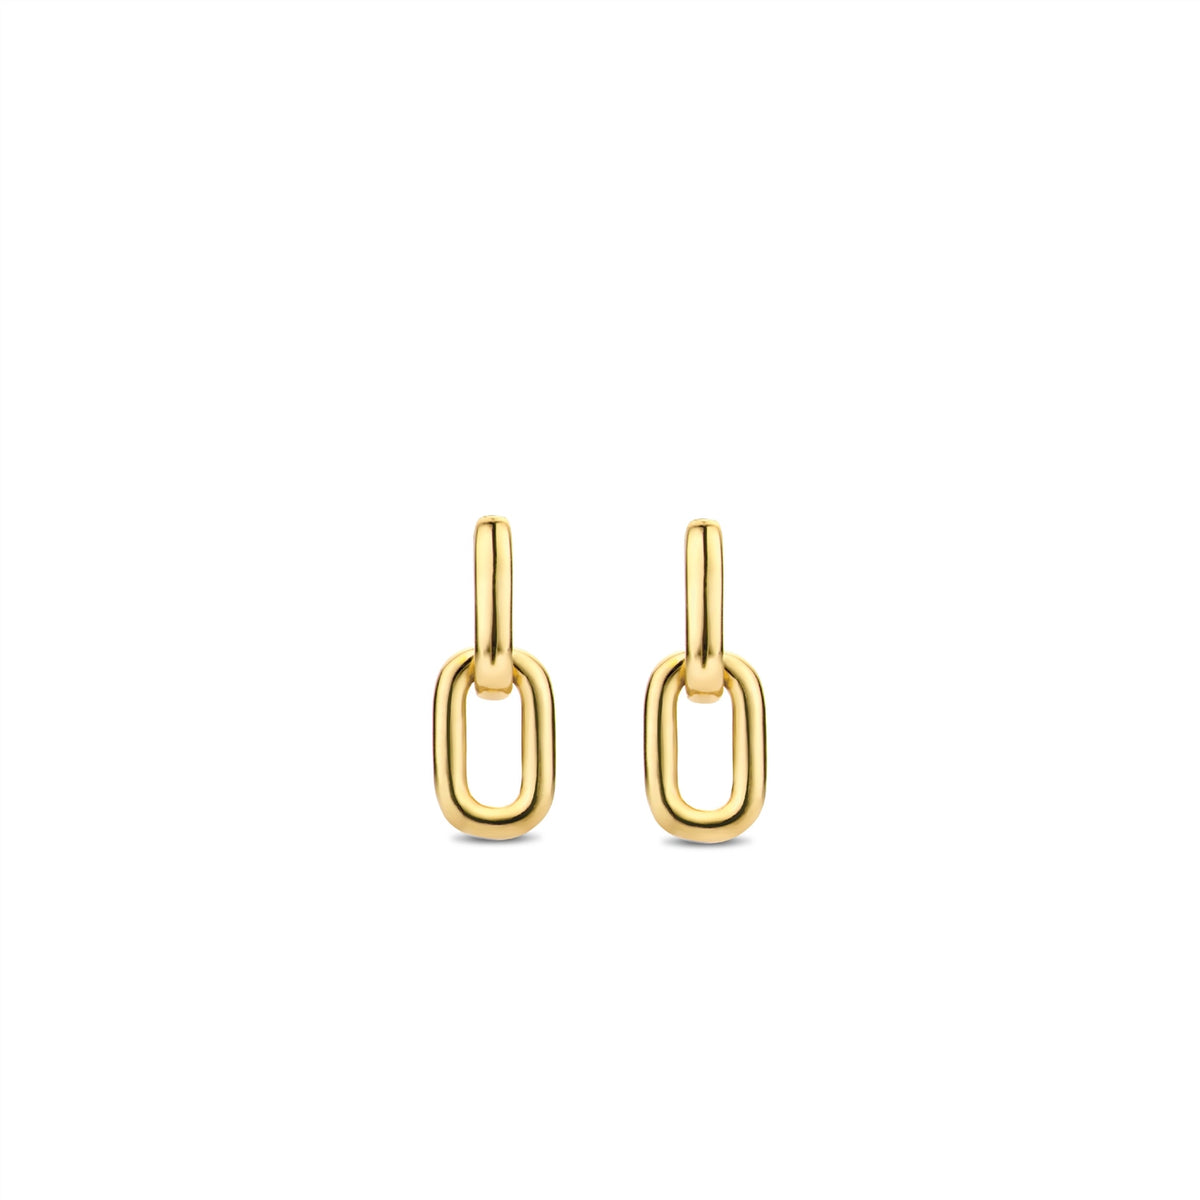 TI SENTO Sterling Silver Gold Tone Chain Link Earrings